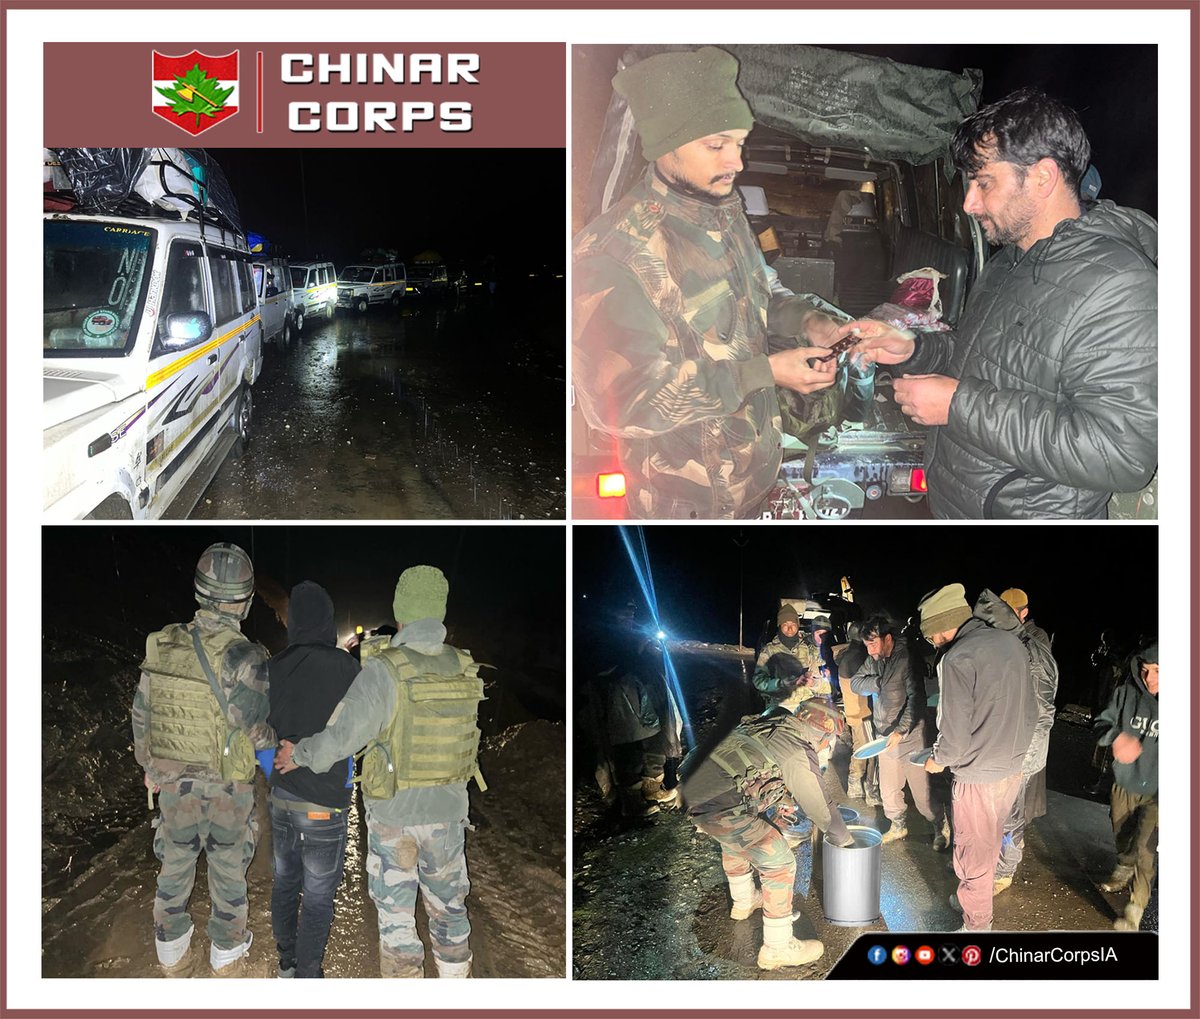 #ChinarWarriors to the rescue' Chinar Warriors in conjunction with @BROindia responded to a destress call by stranded civilians due to sudden landslides near Badogam in #Gurez, providing assistance in evacuation of approx 250 civilians including elderly, women & children along…